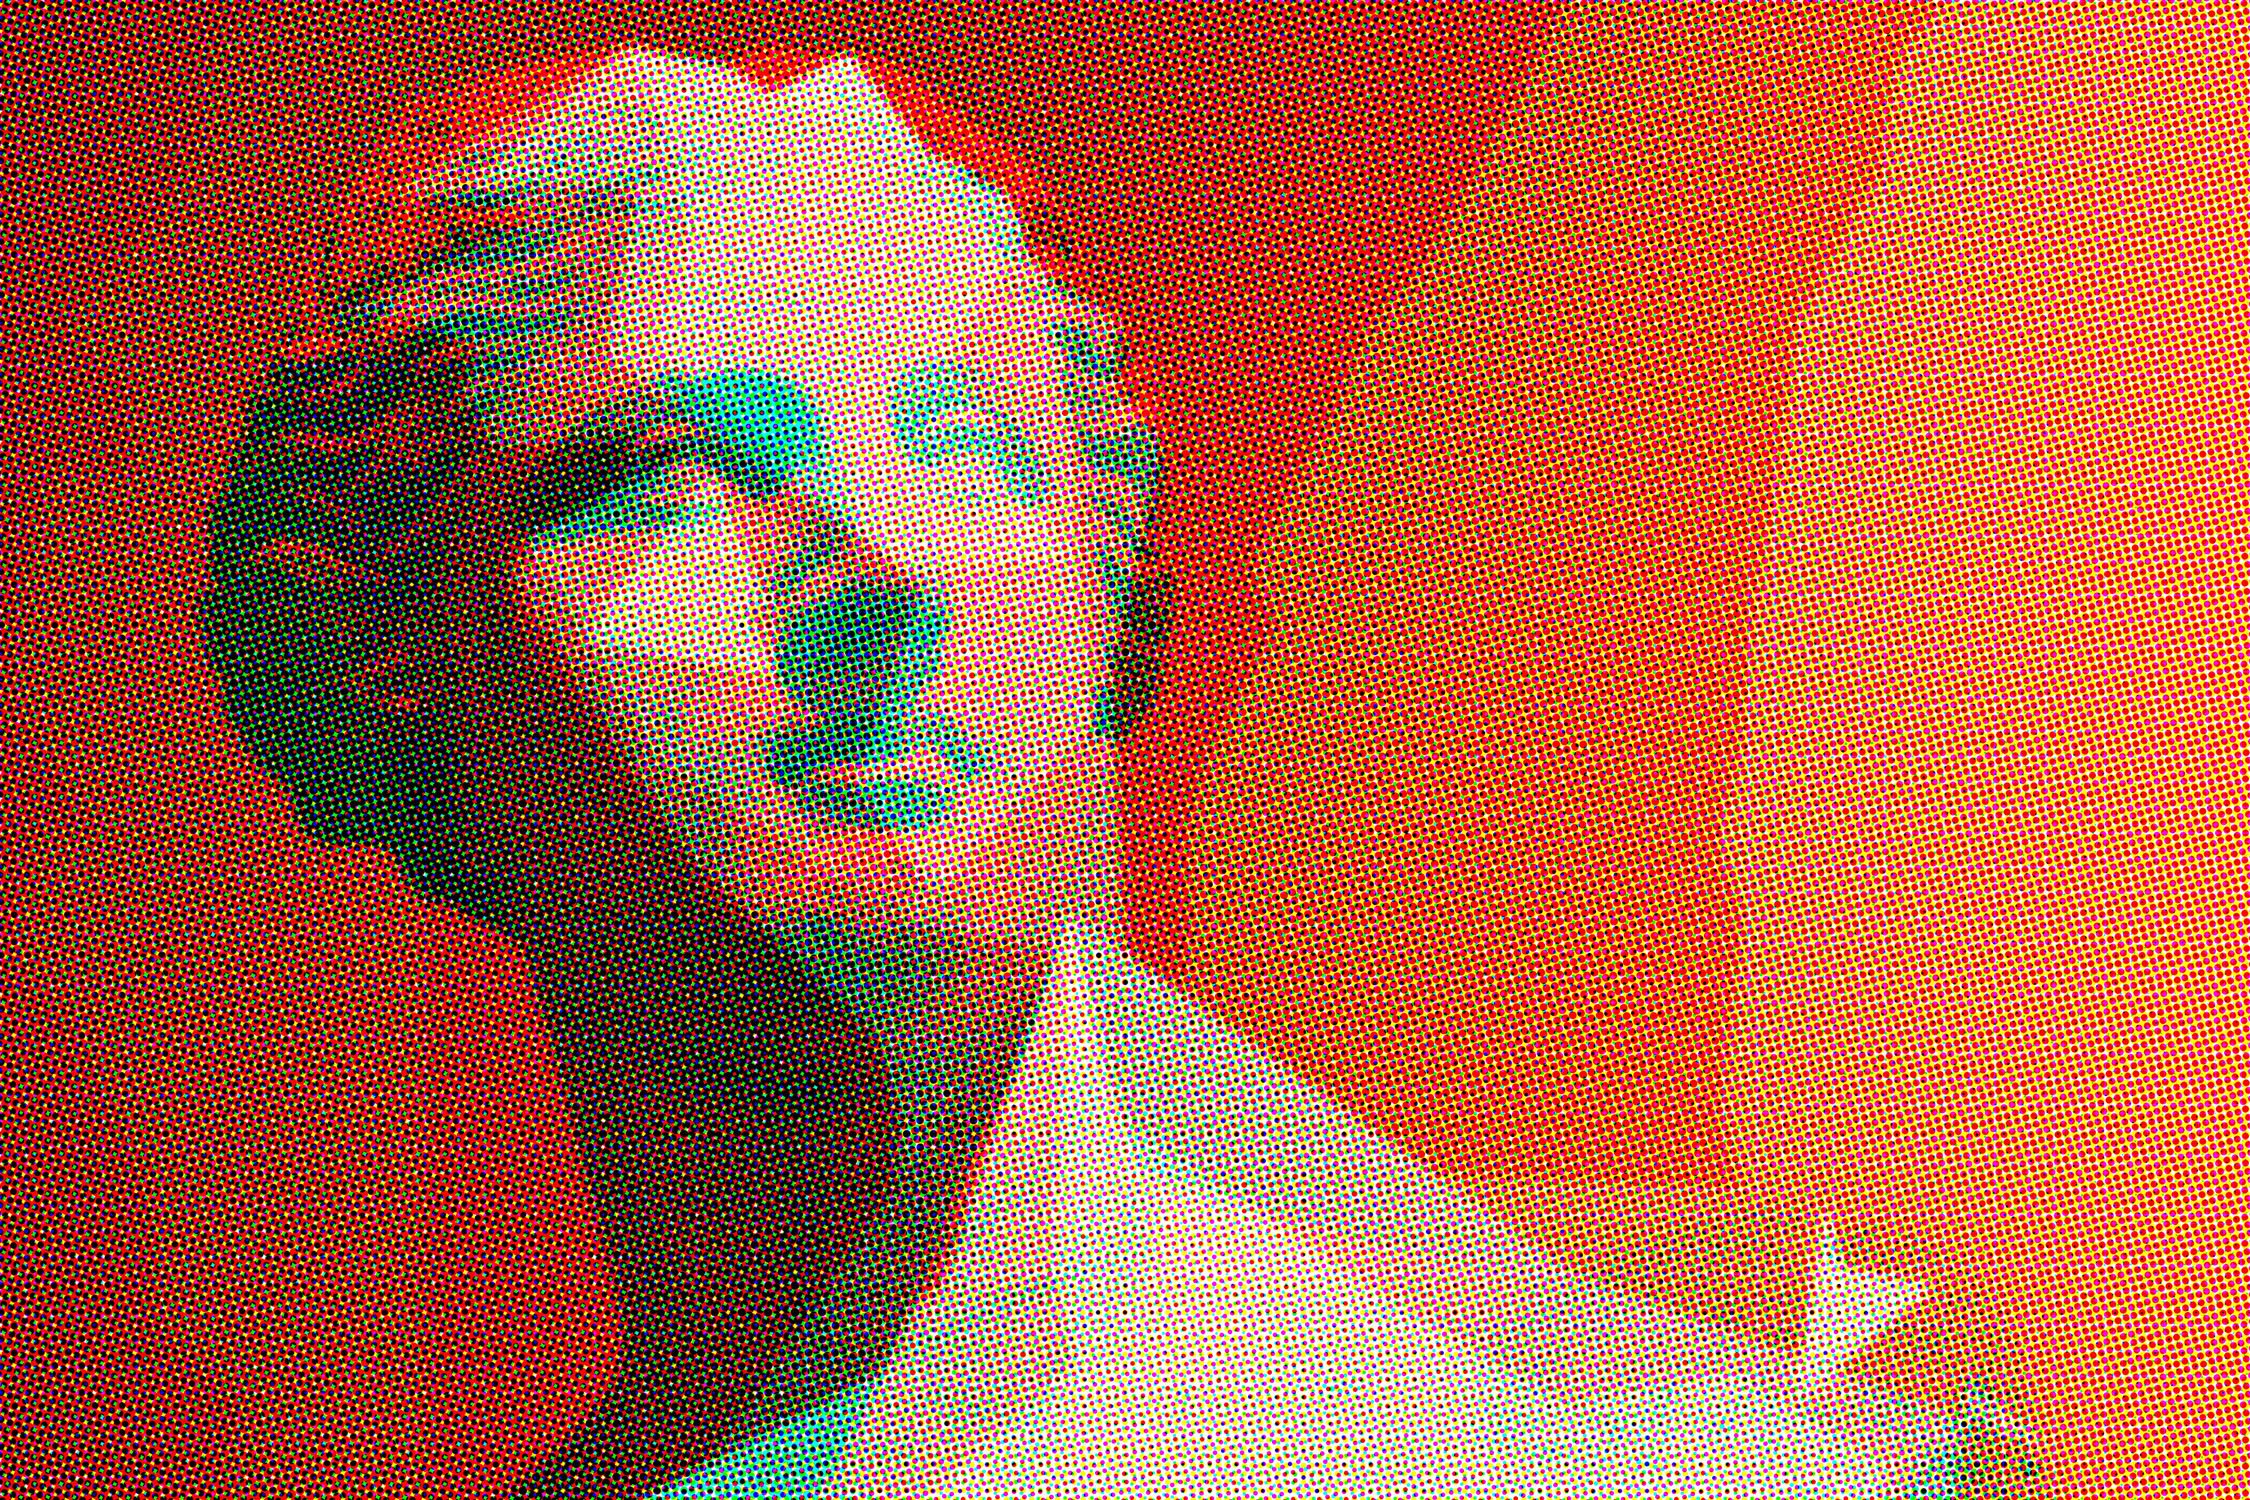 Halftone Polygon Poster Effectpreview image.